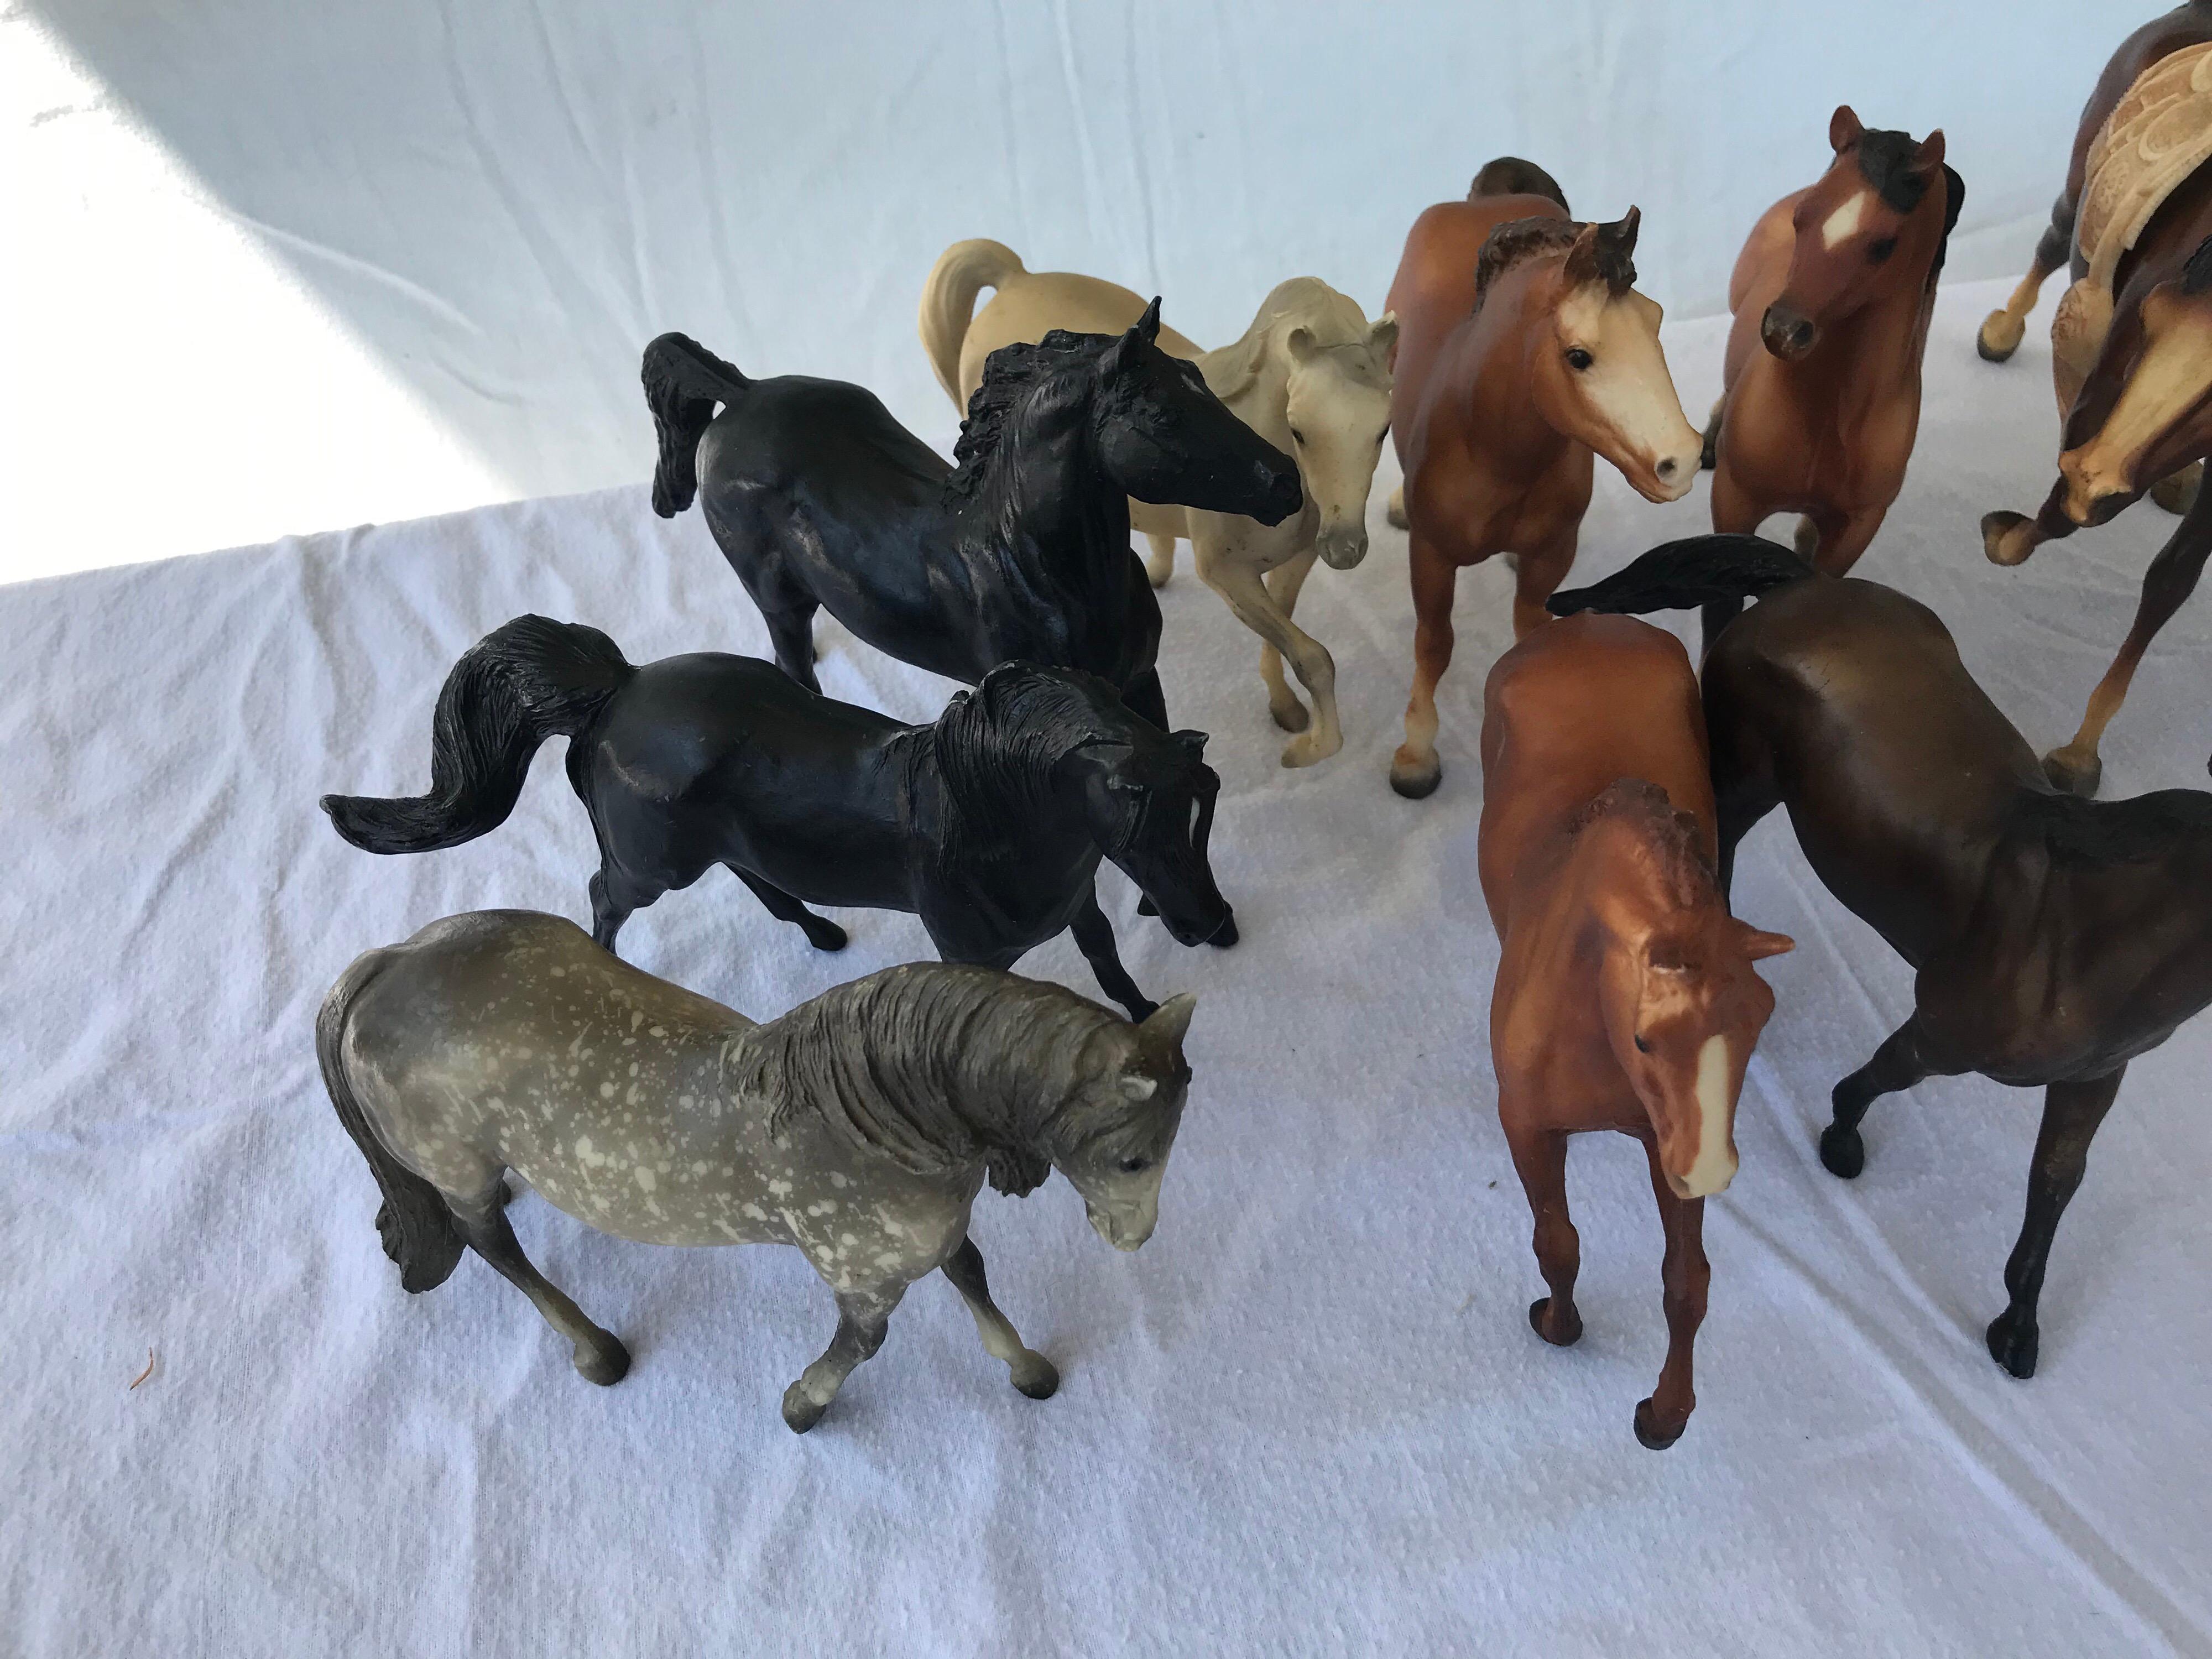 Collection of 11 vintage Breyer Horses. Most from the 1970s era. Hard , durable plastic. Perfect for that grandchild who loves horses. We have one other listing of Breyer horses. This is the larger sized collection. Please double check the